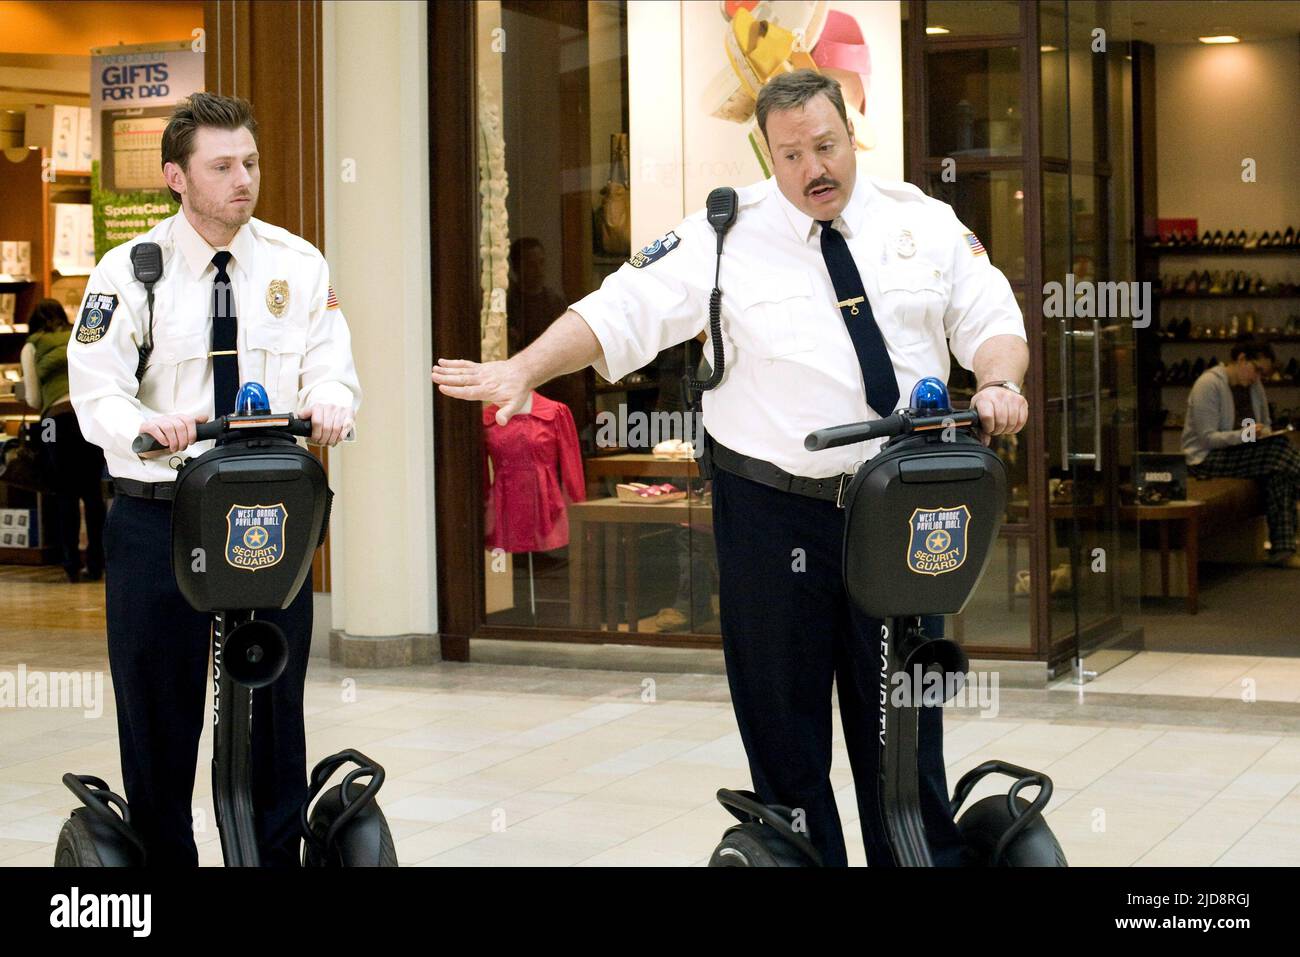 O'DONNELL,JAMES, PAUL BLART: MALL COP, 2009, Stock Photo